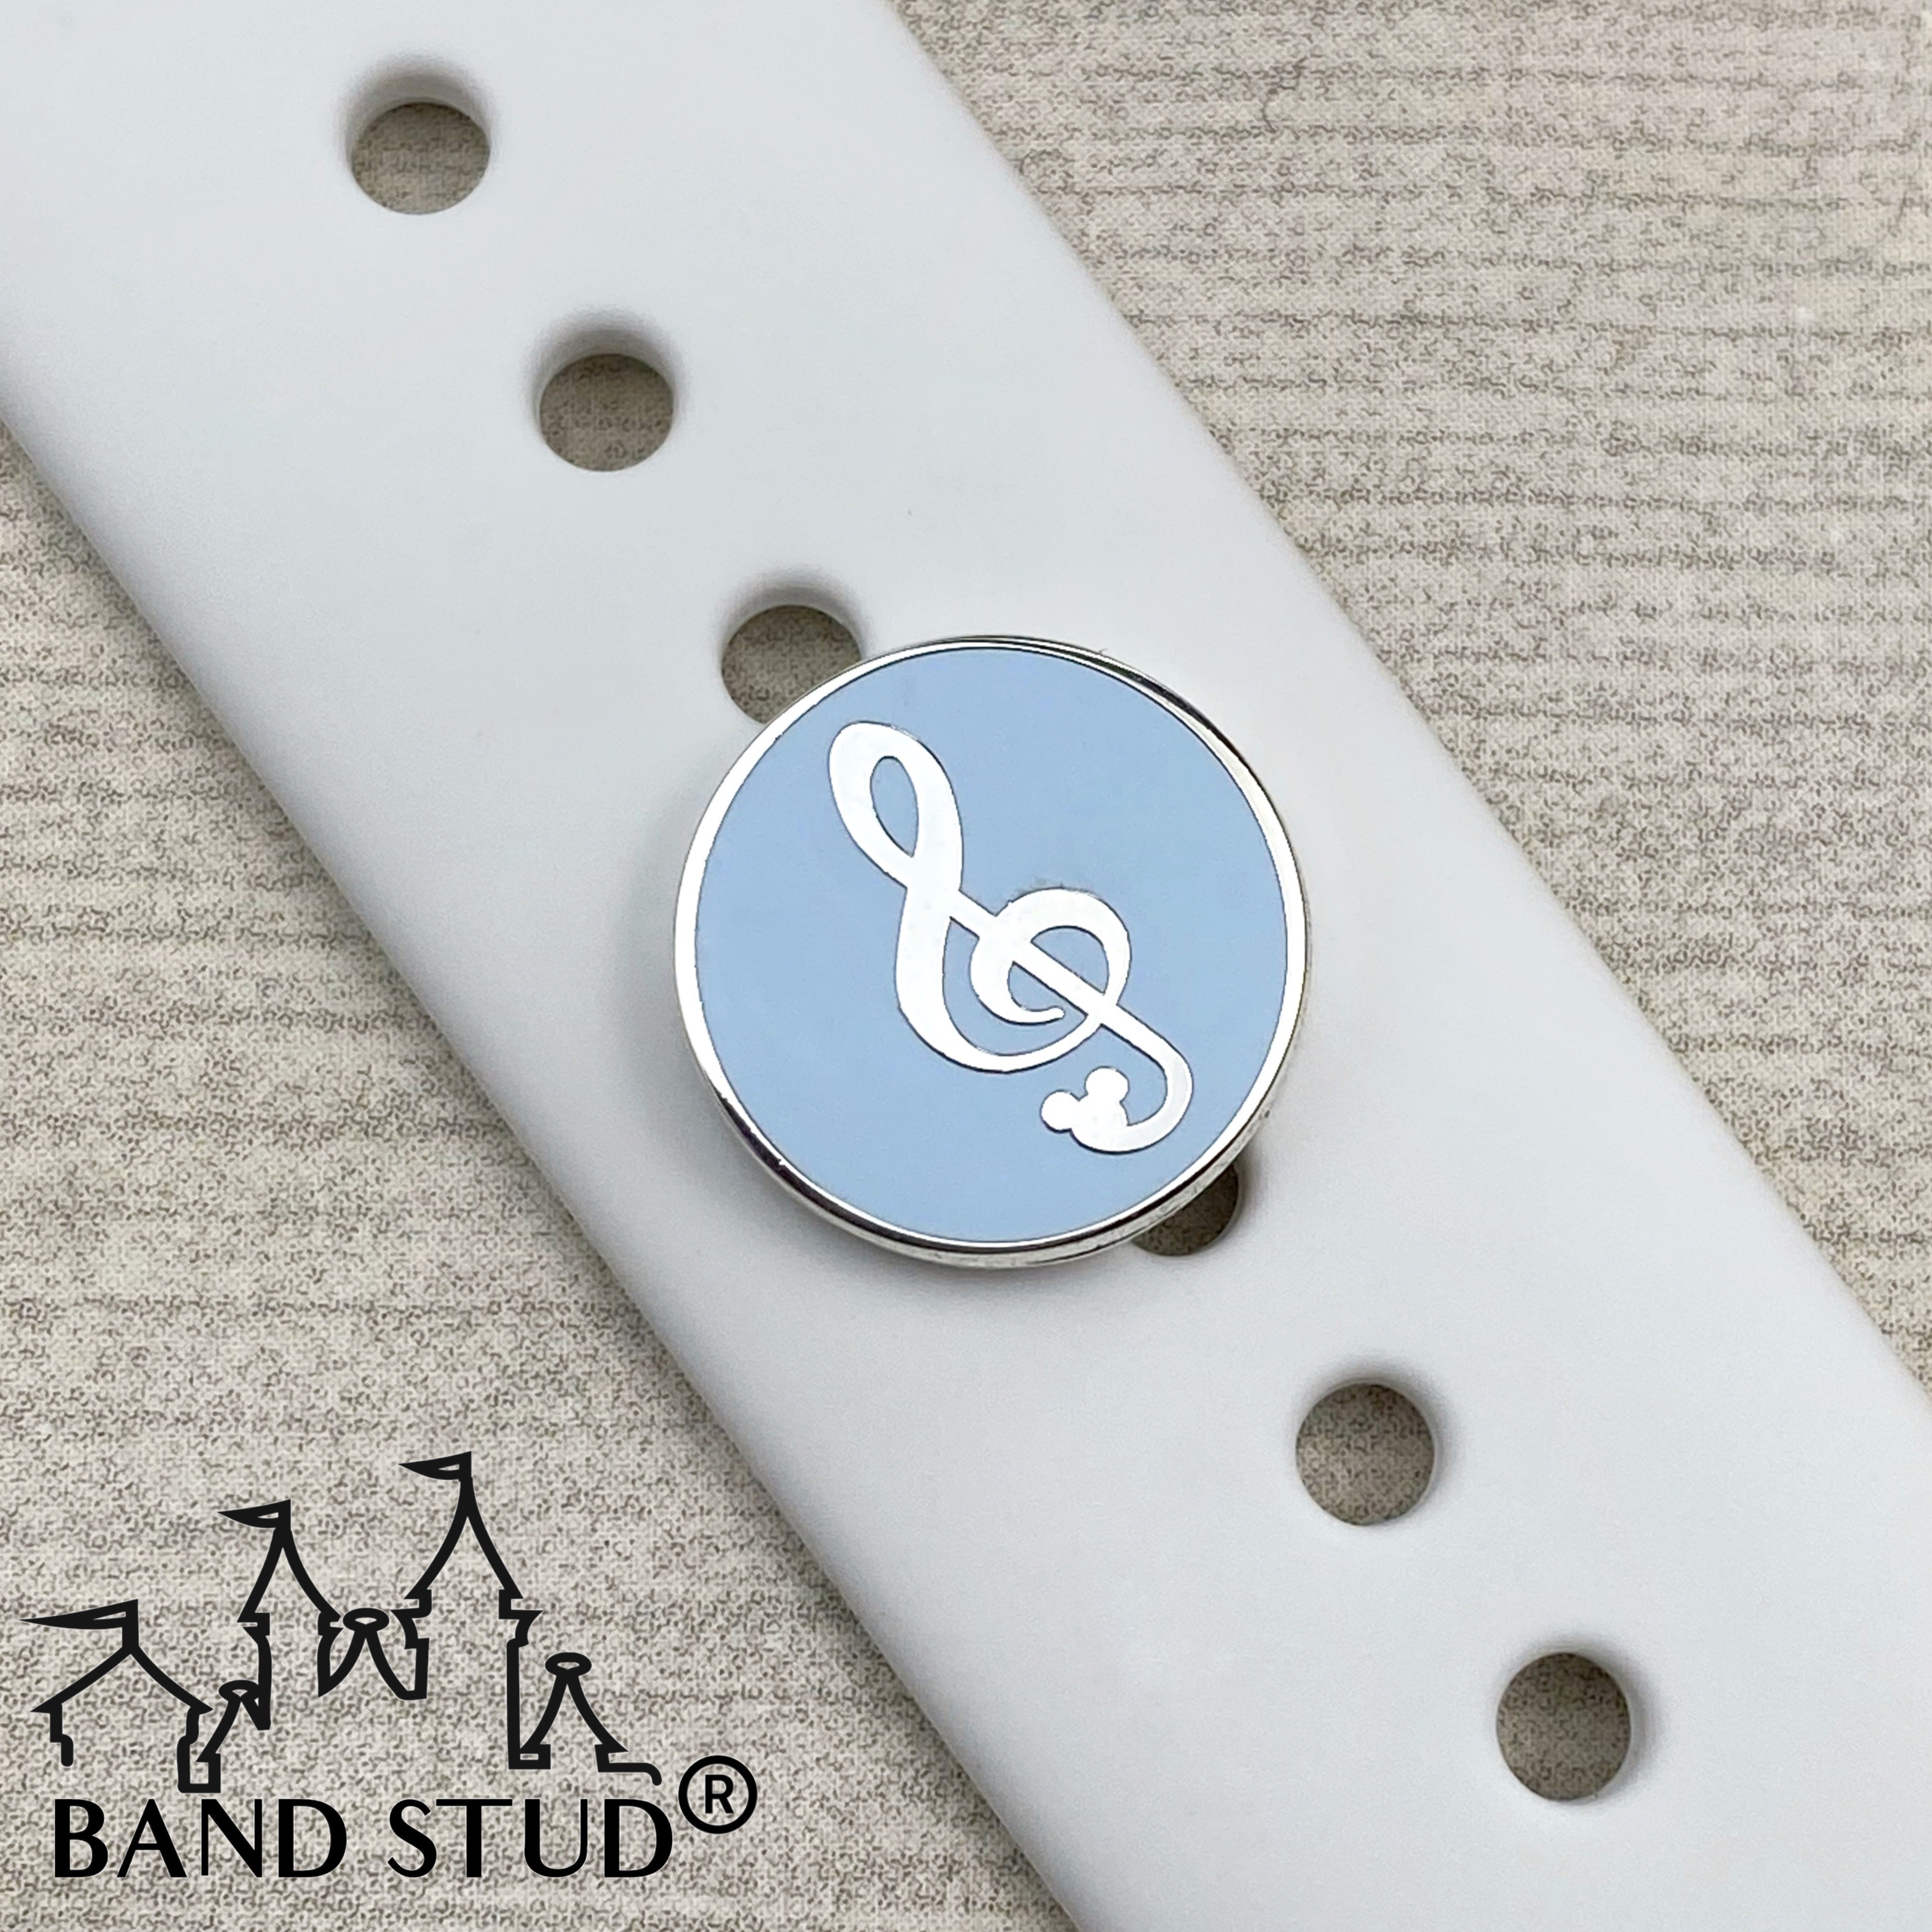 Band Stud® - Musical Mouse MARKDOWN